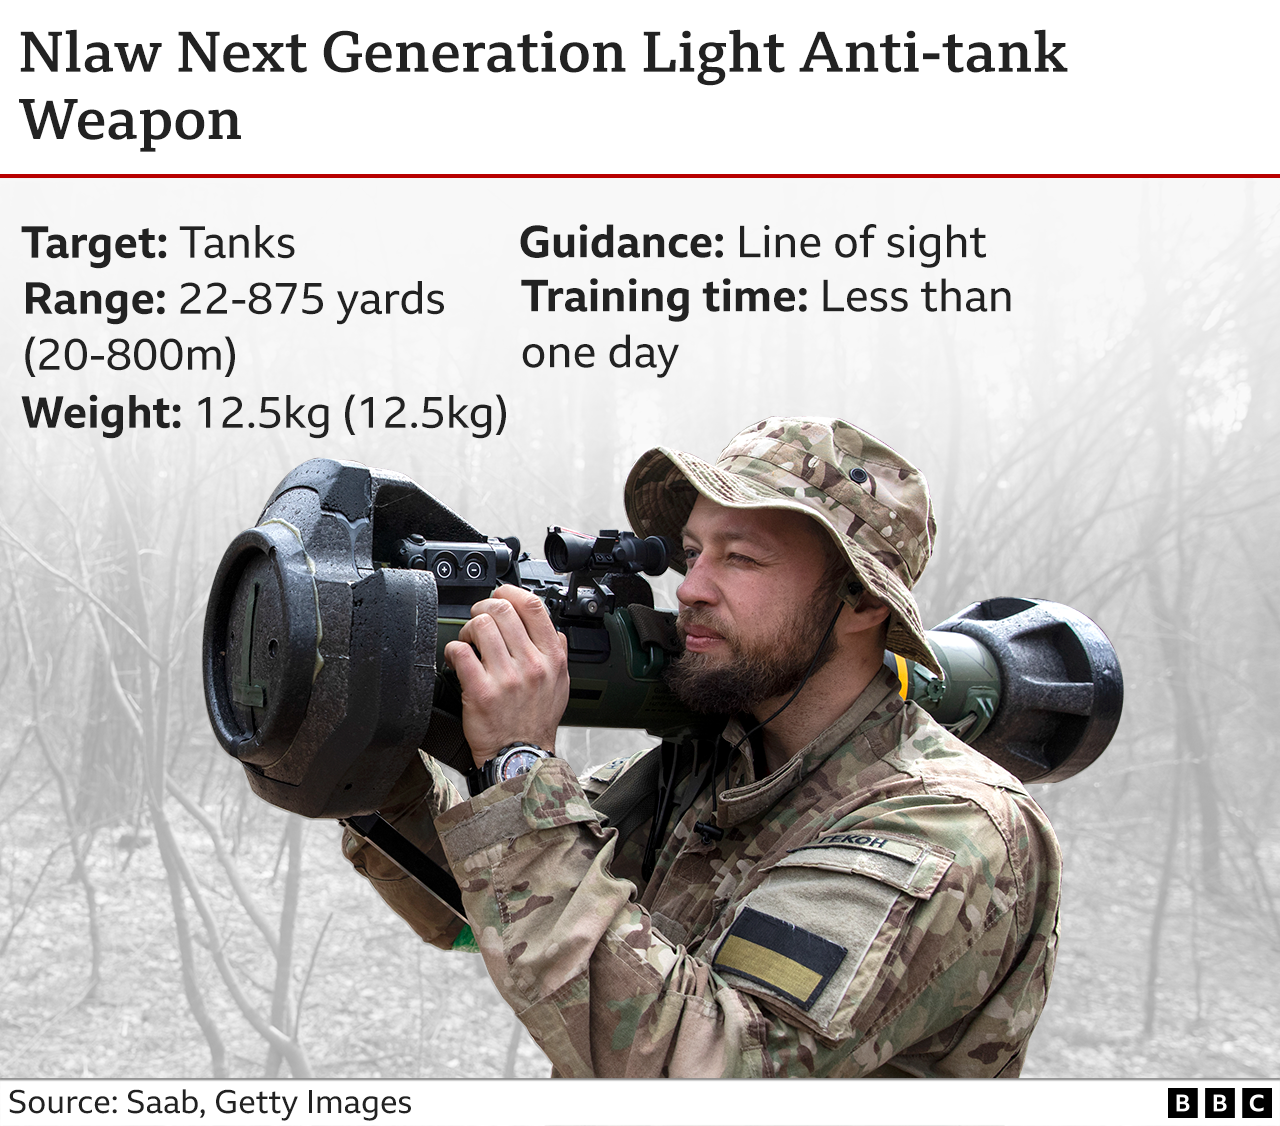 Graphic showing details of Nlaw anti-tank weapon.